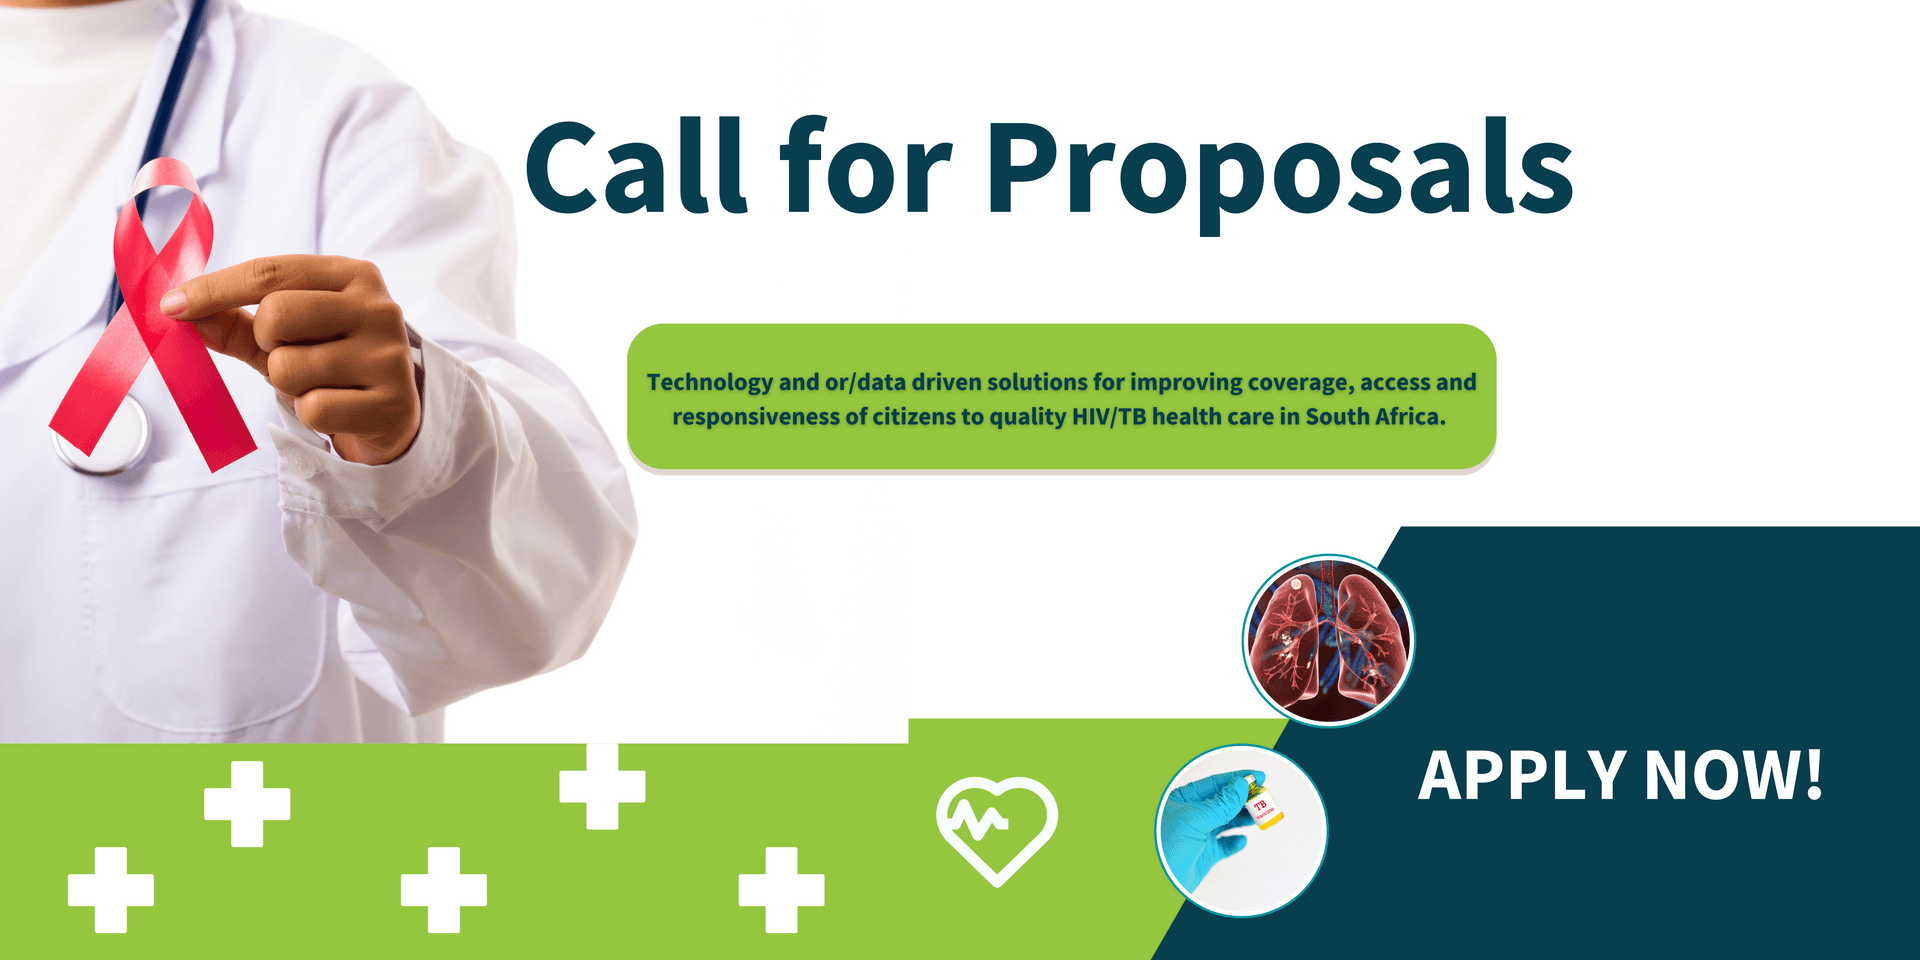 Call for proposals from startup phase enterprises to develop digital health solutions